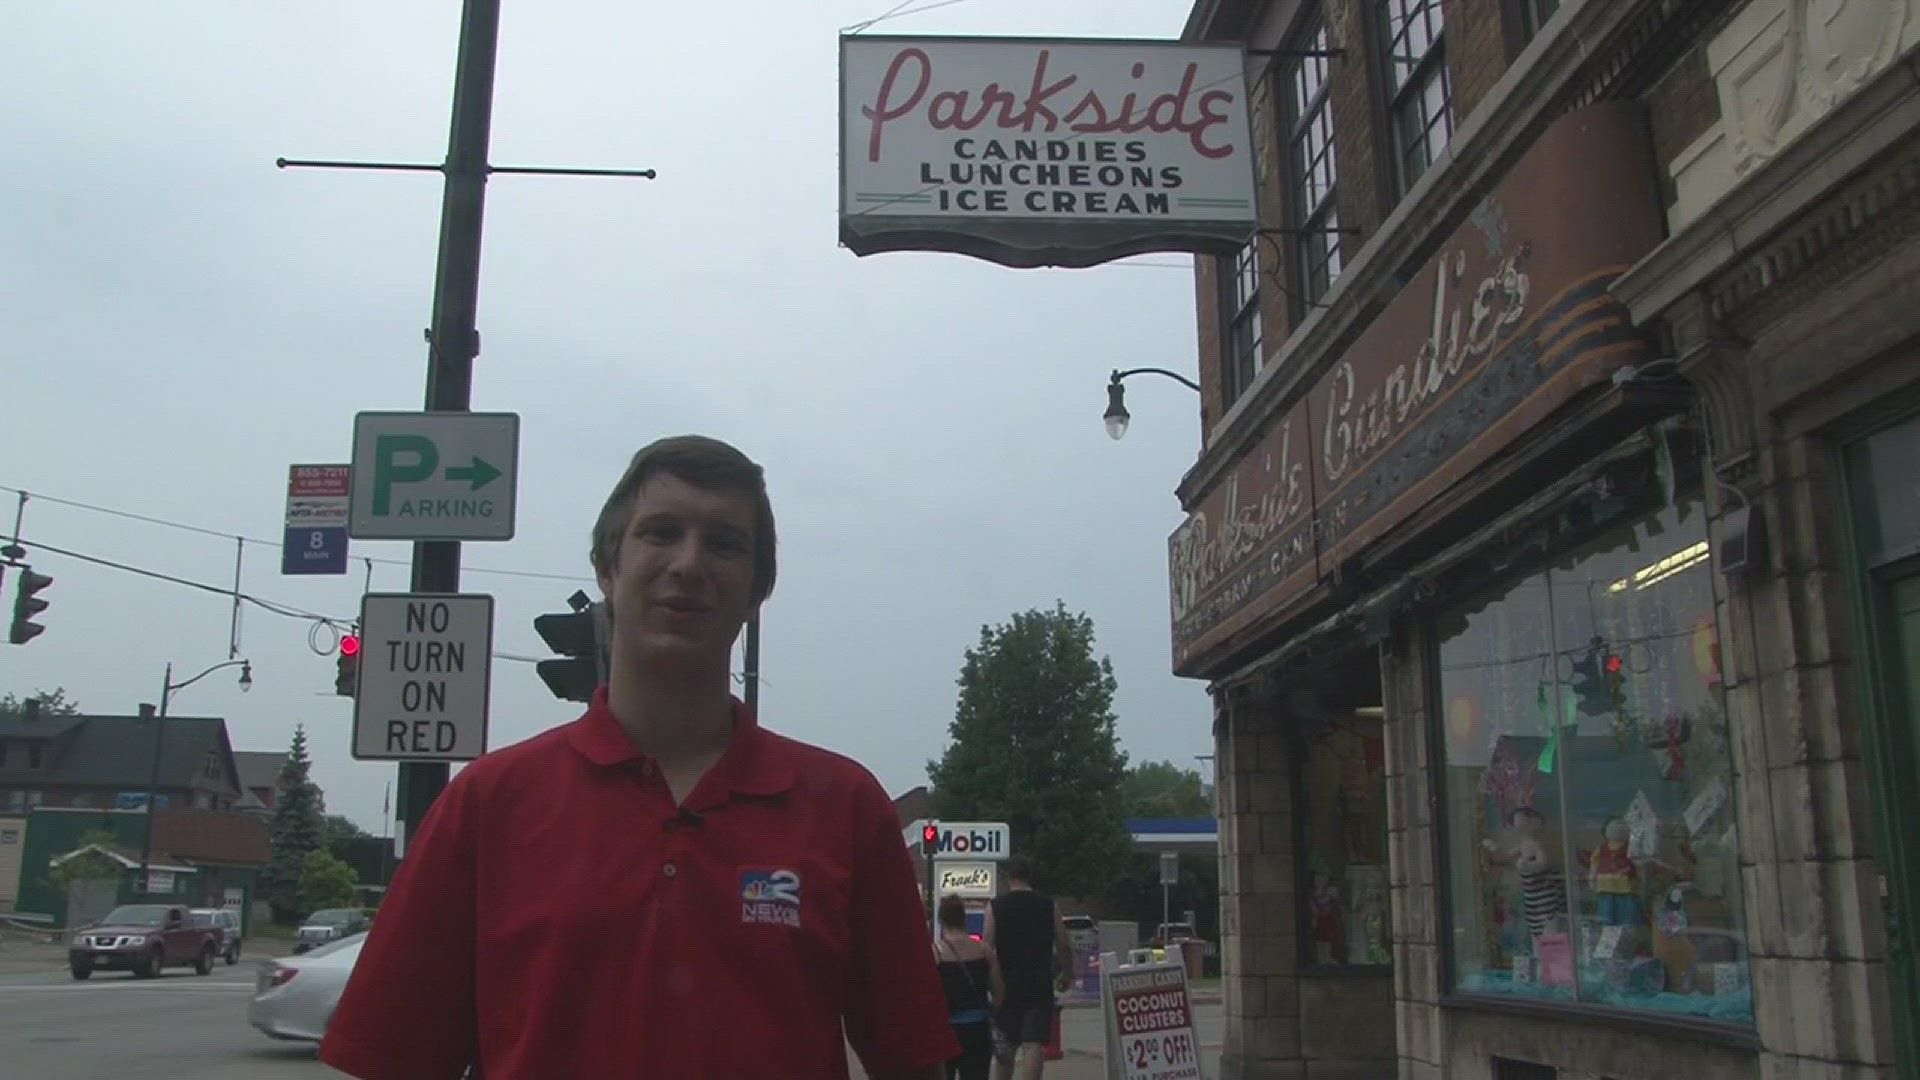 Zachary Kineke checks out this historic ice cream and candy shop near UB South.